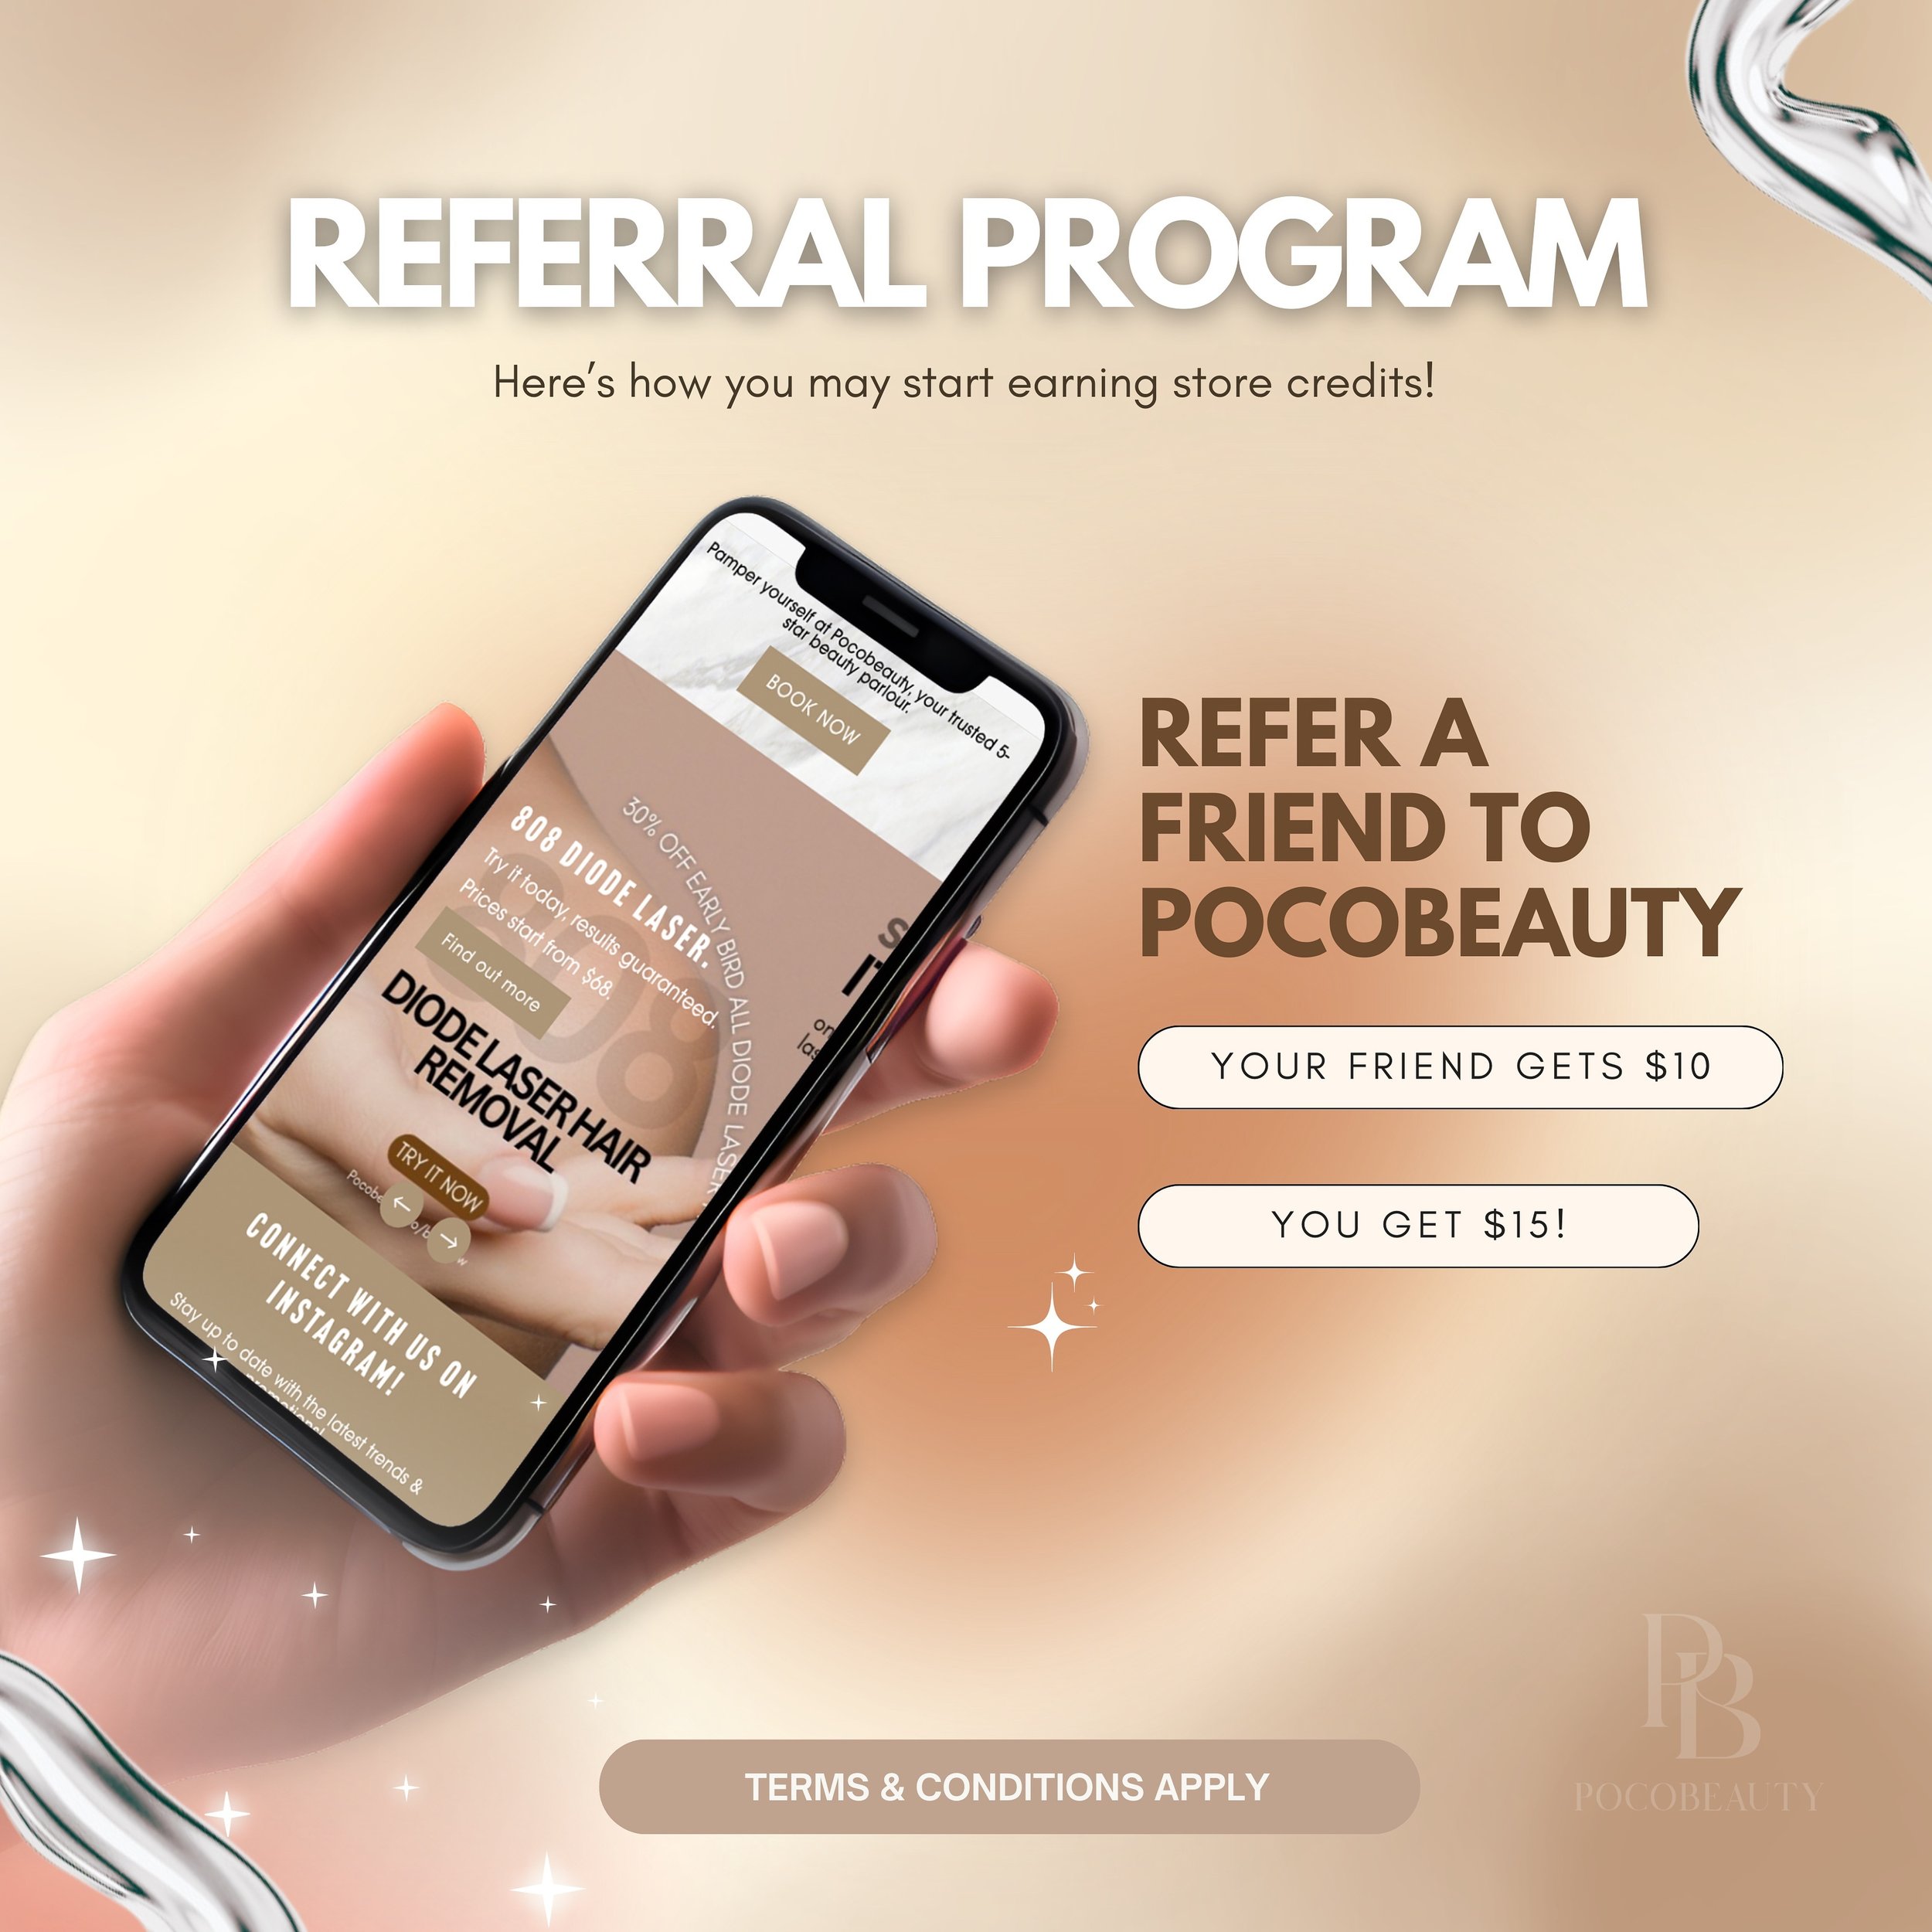 Yes, as you&rsquo;ve been seeing it, we have a referral programme promo!

🕊 𝐑𝐄𝐅𝐄𝐑 𝐀 𝐅𝐑𝐈𝐄𝐍𝐃 𝐓𝐎 𝐏𝐎𝐂𝐎𝐁𝐄𝐀𝐔𝐓𝐘 🕊 &amp; give them the gift of $10 store credit. And guess what? You&rsquo;ll receive $15 in store credits too! 🎉 It&rs